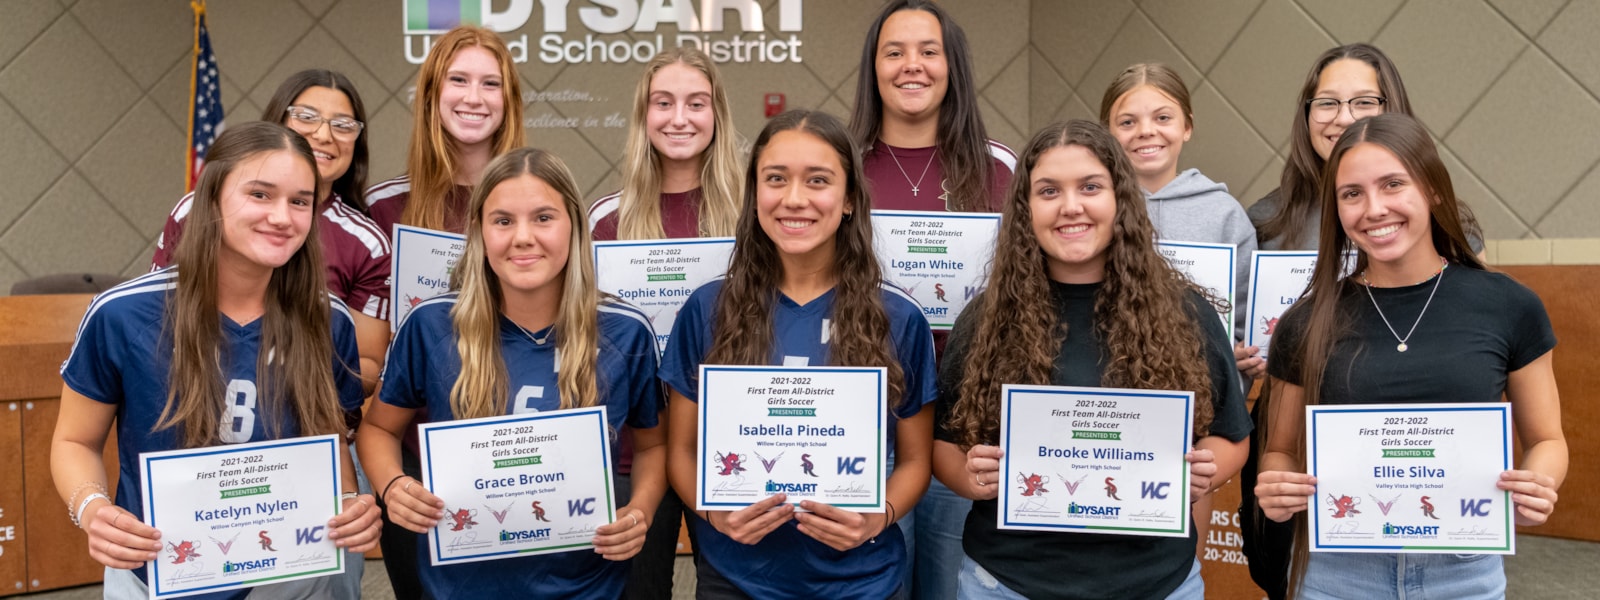 Girls soccer players pose with certificates